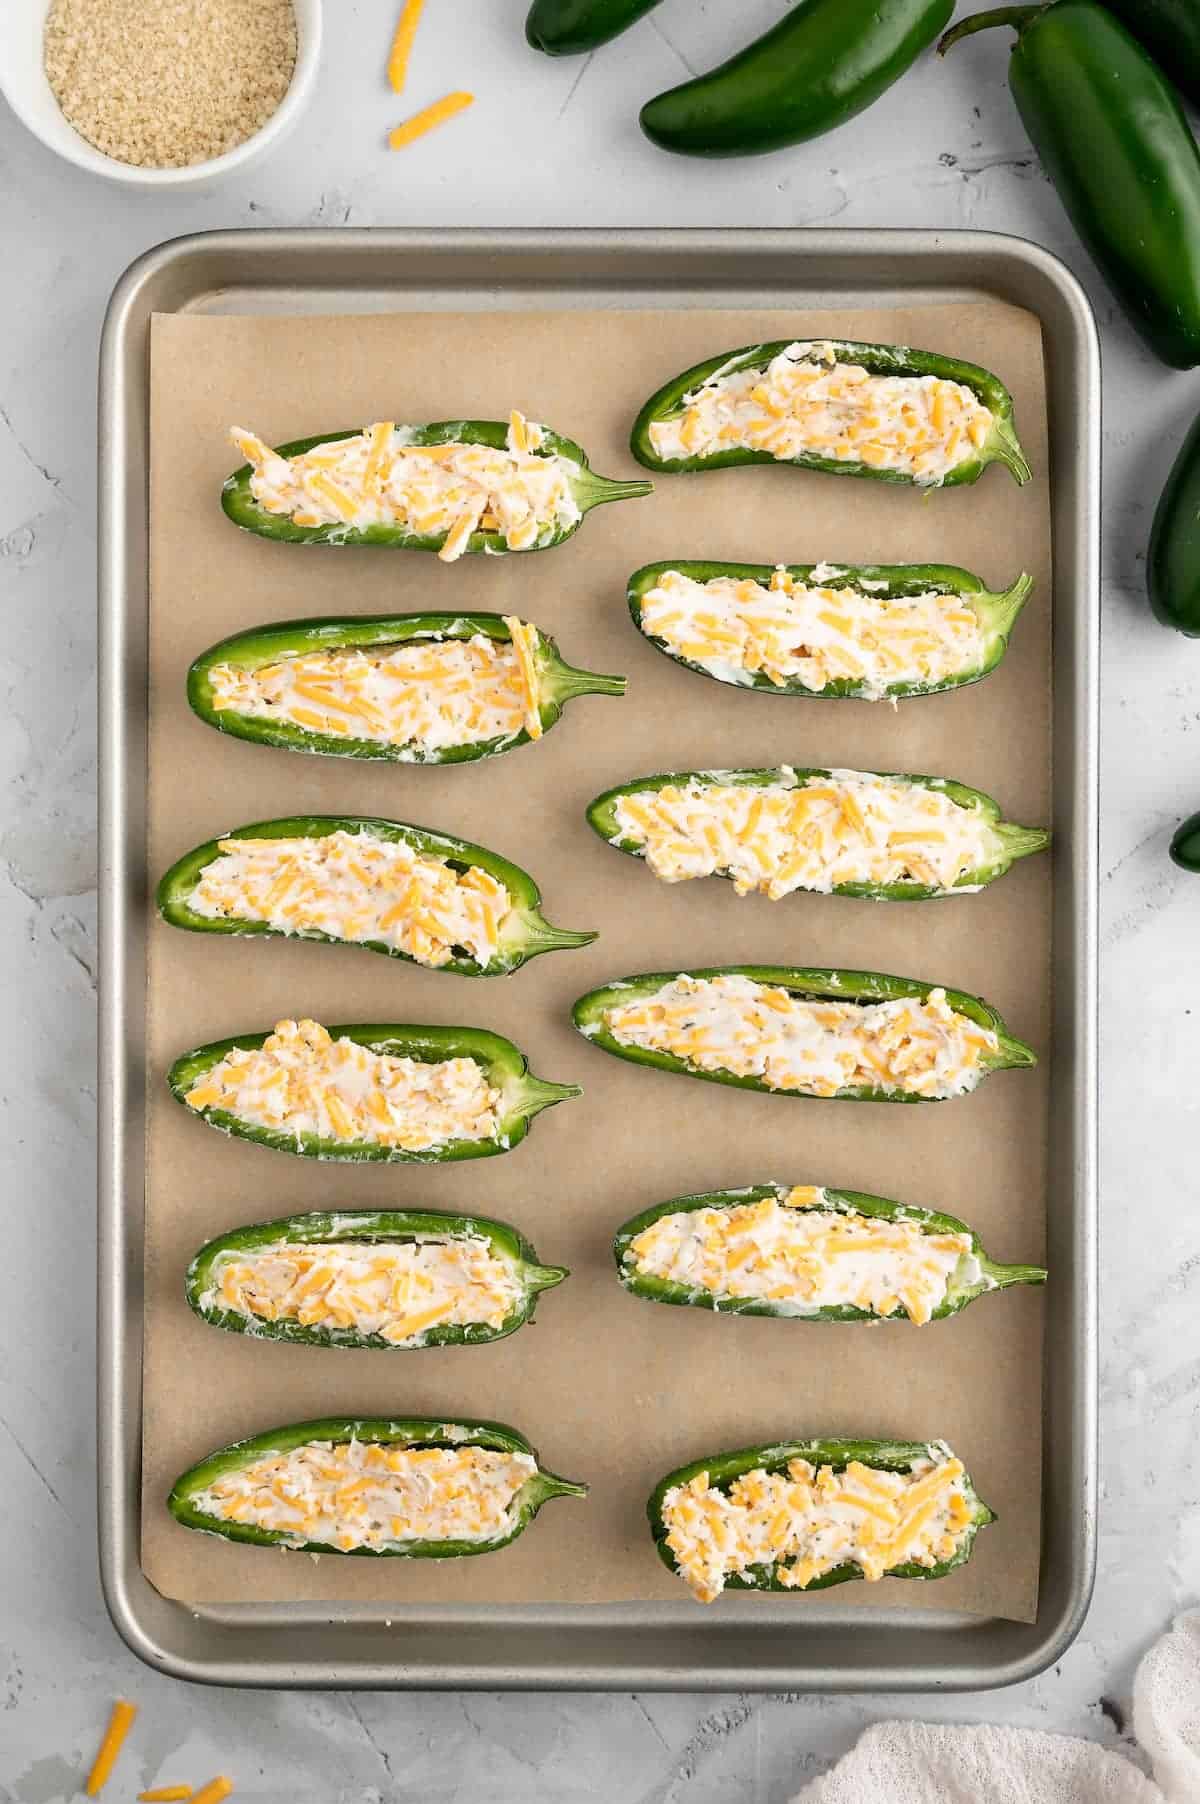 Jalapeno poppers filled with a vegan cheese mixture and lined up on a baking sheet.